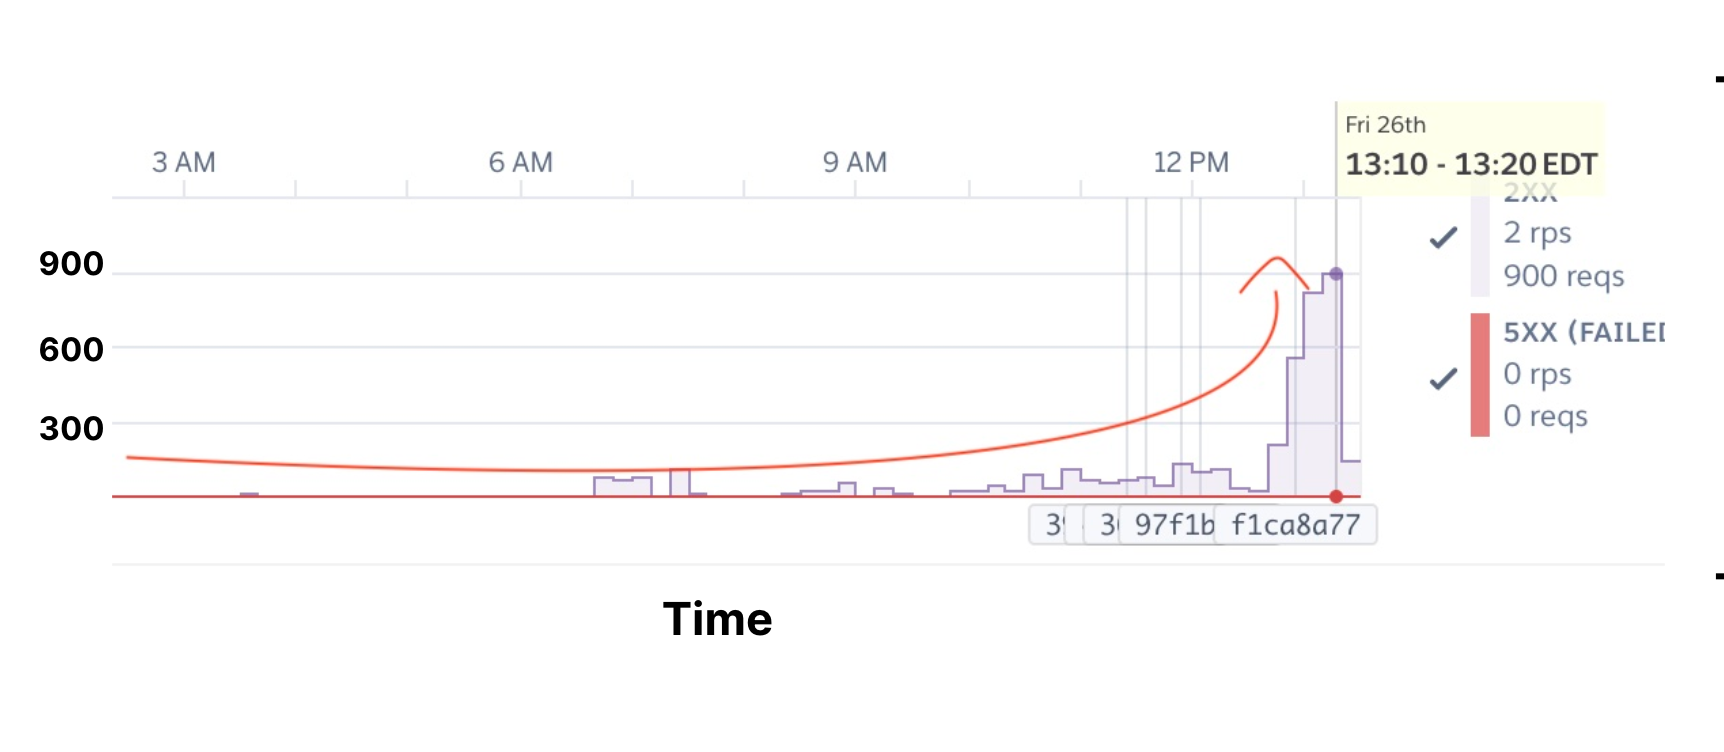 Heroku throughput graph showing 900 request at 1:10 PM ET on Friday May 26th